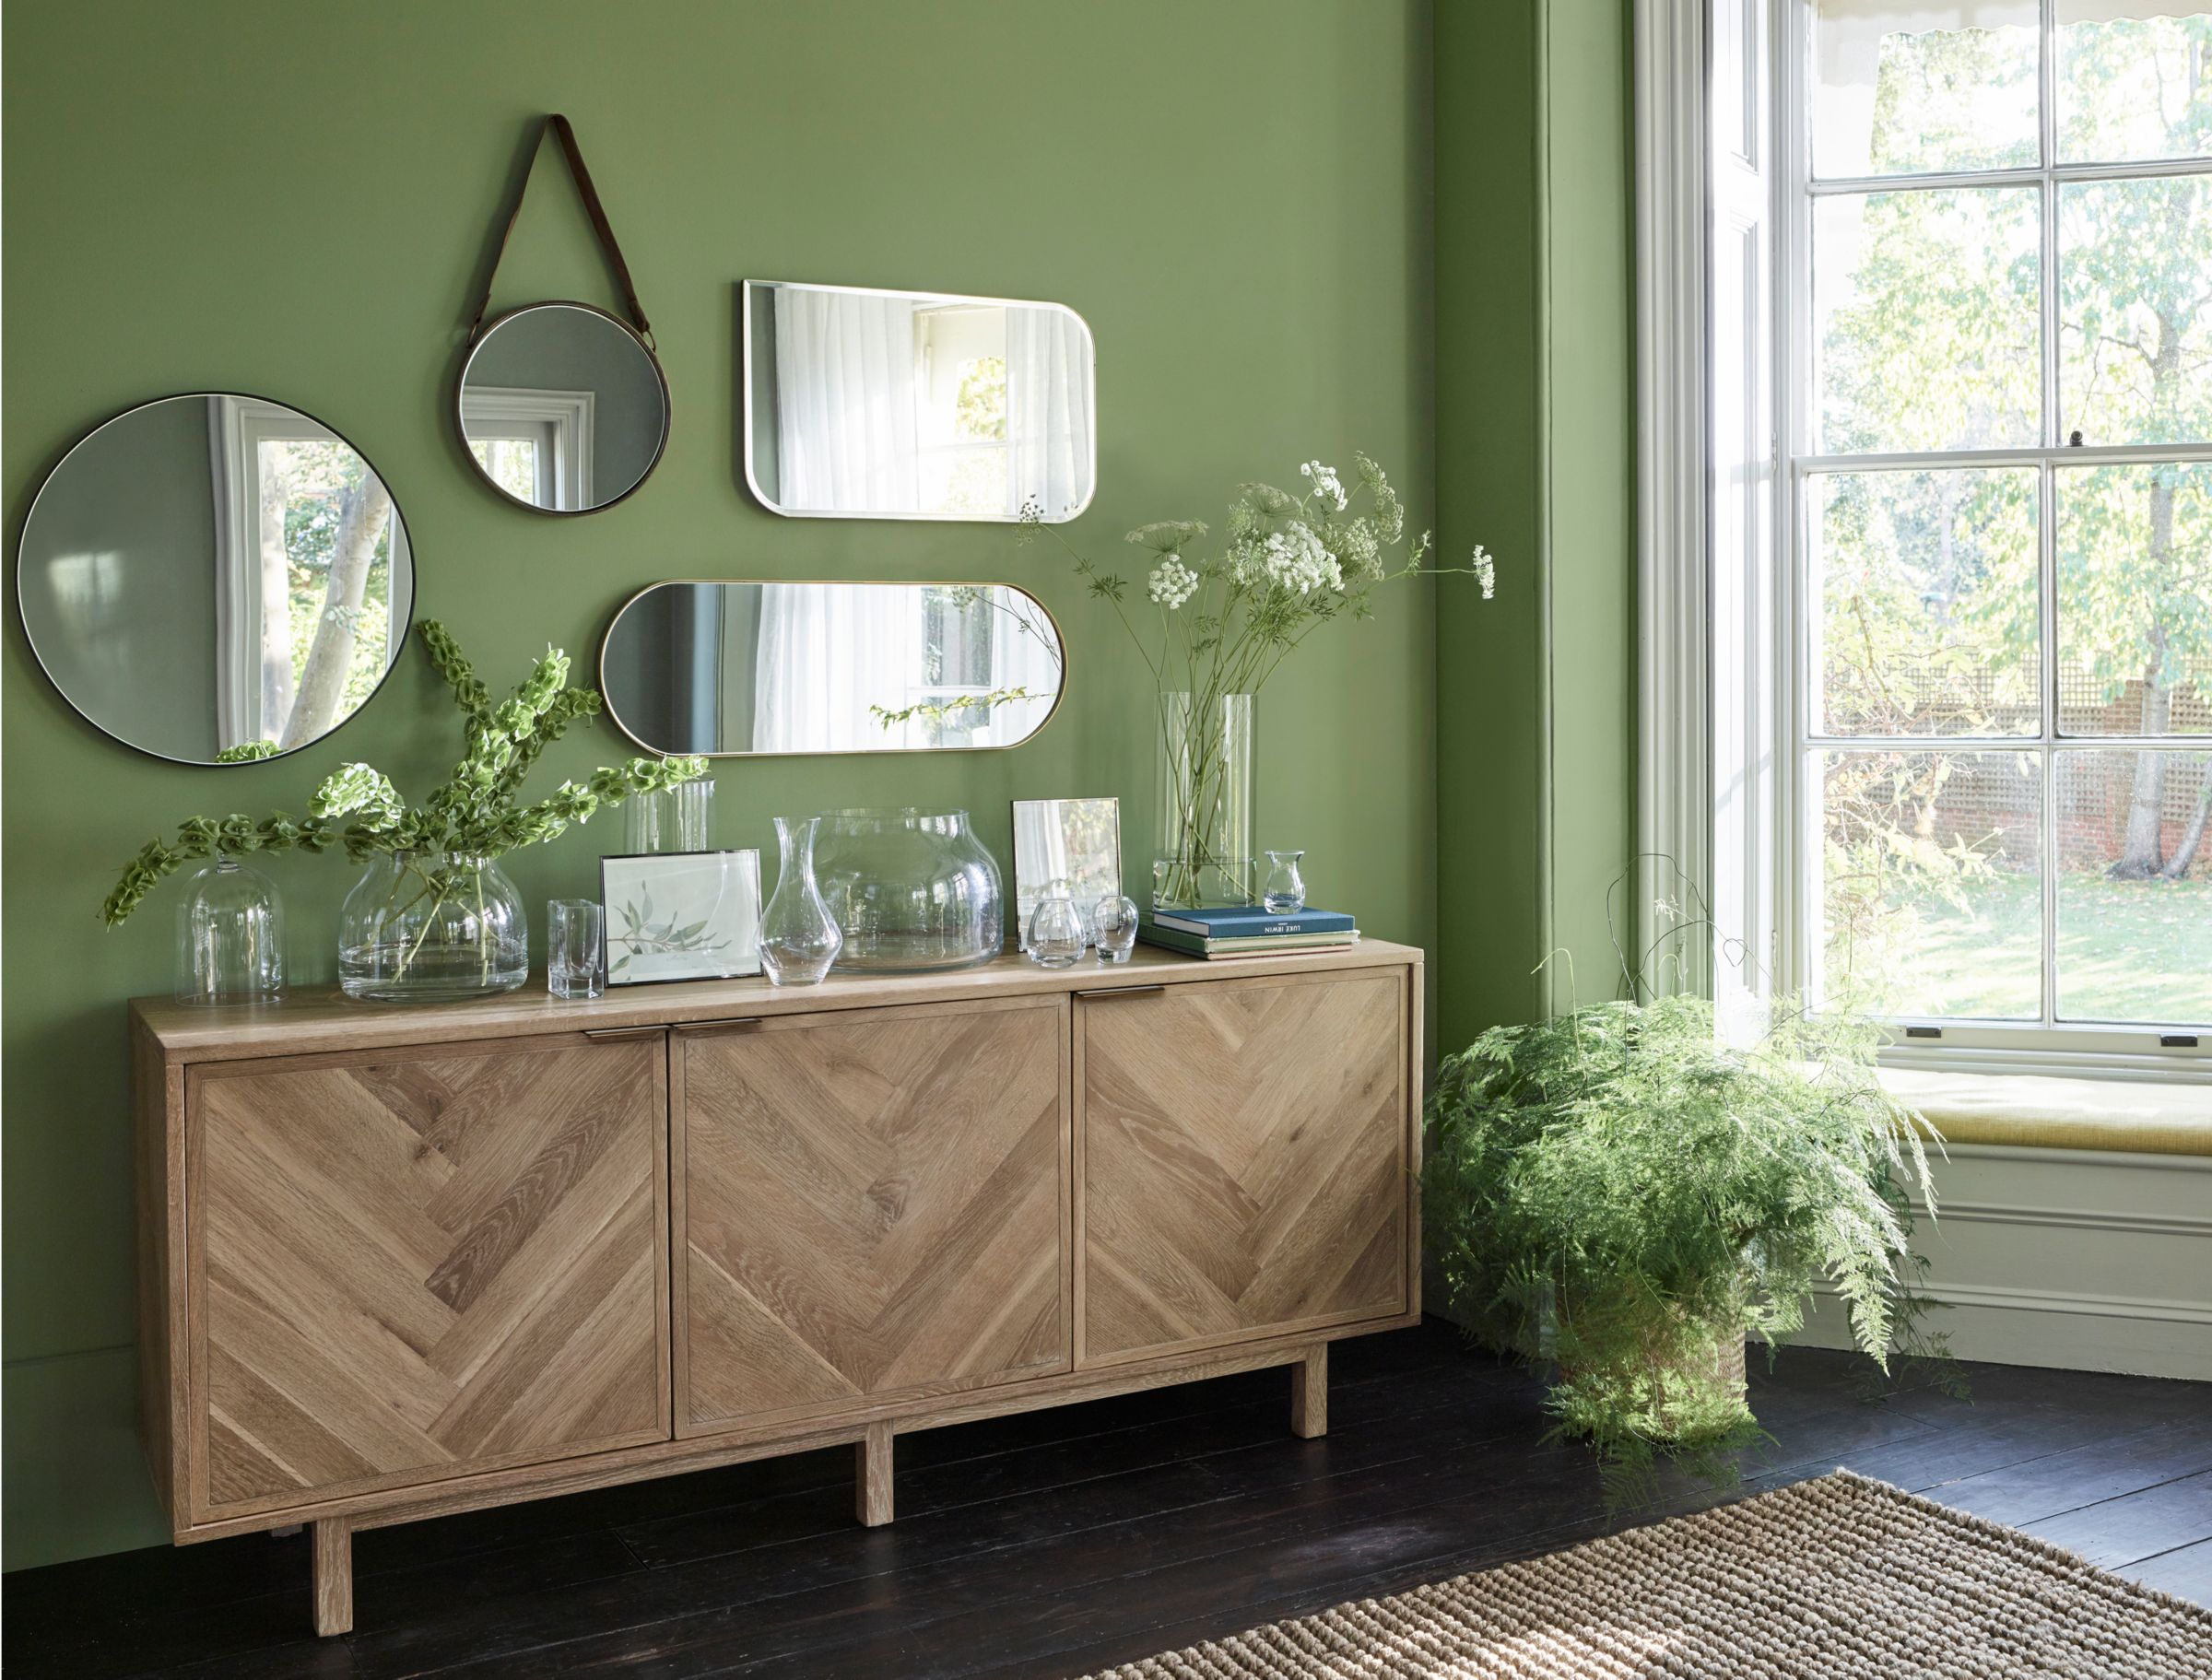 Green wall with mirrors and wooden cabinet